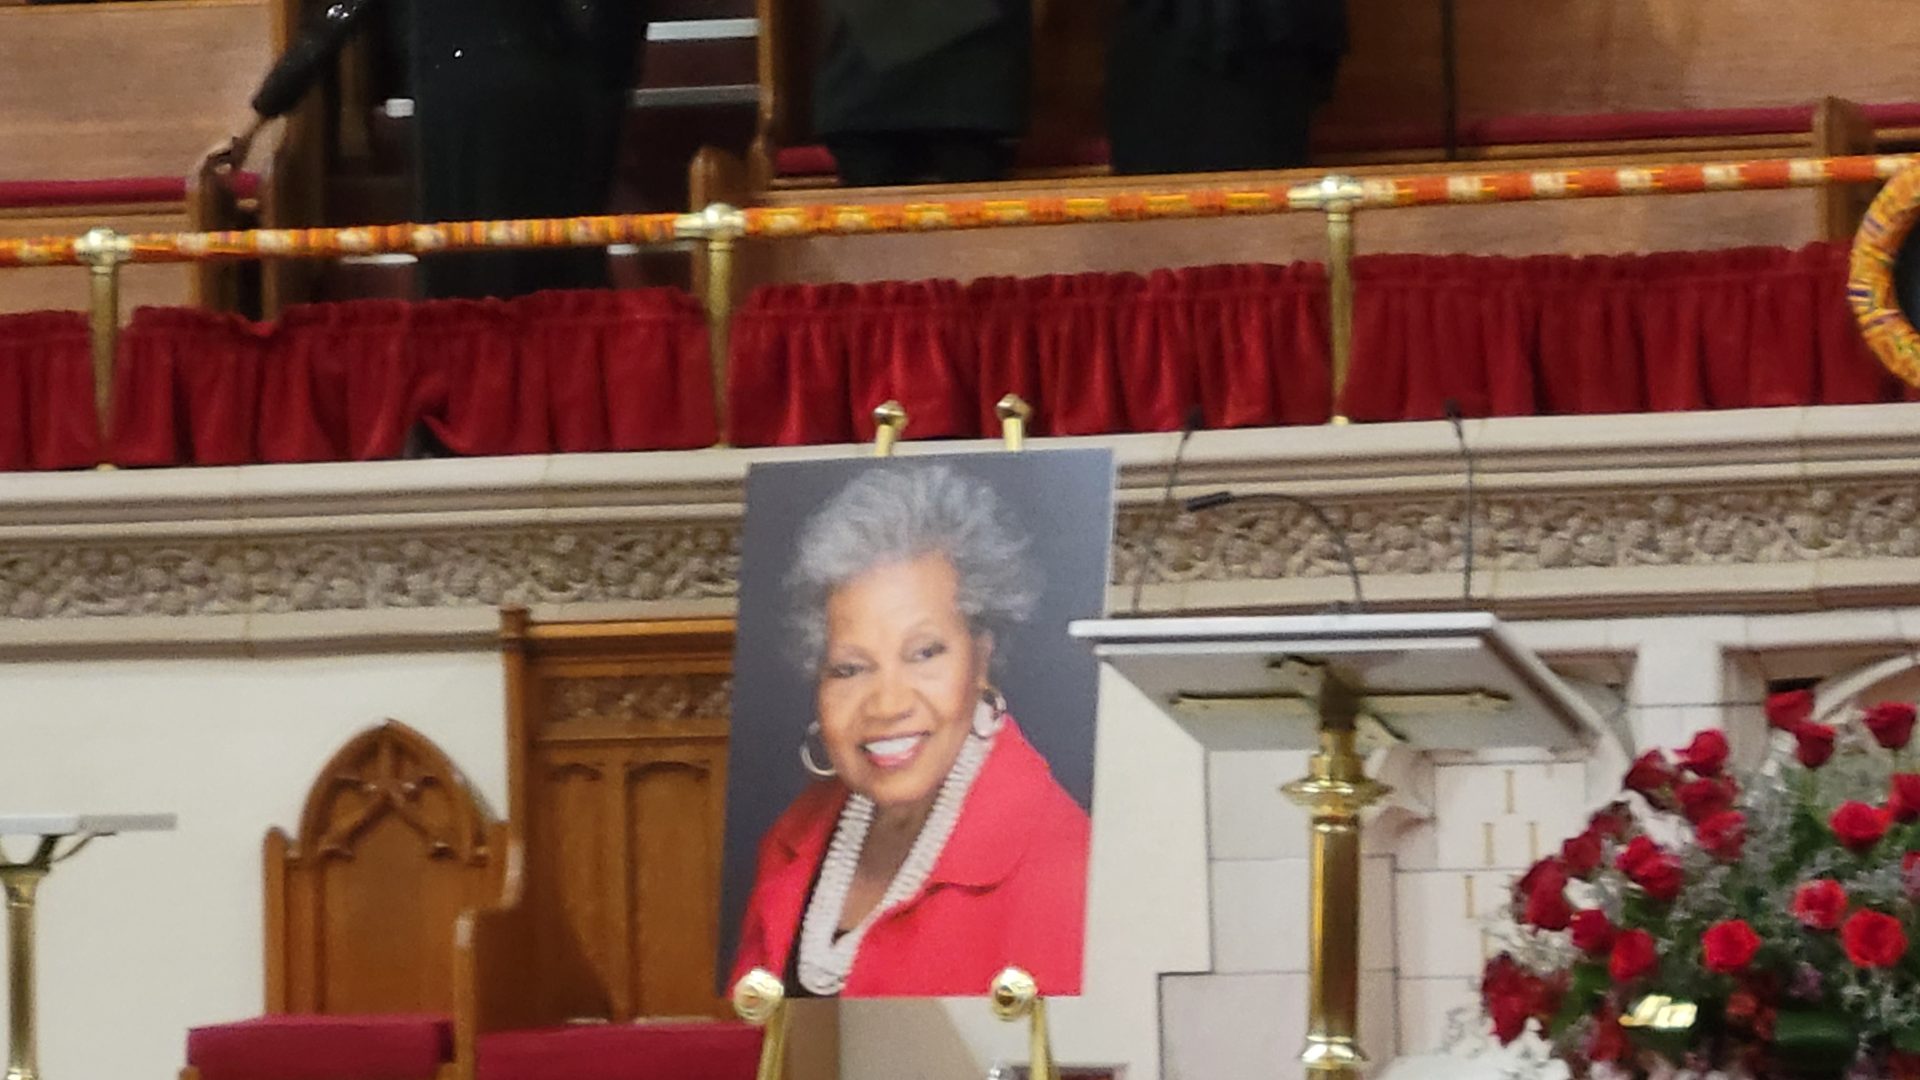 Patricia Pates Eaton is remembered at a memorial service at Abyssinian Baptist Church. (Photo by Derrel Jazz Johnson for rolling out.)